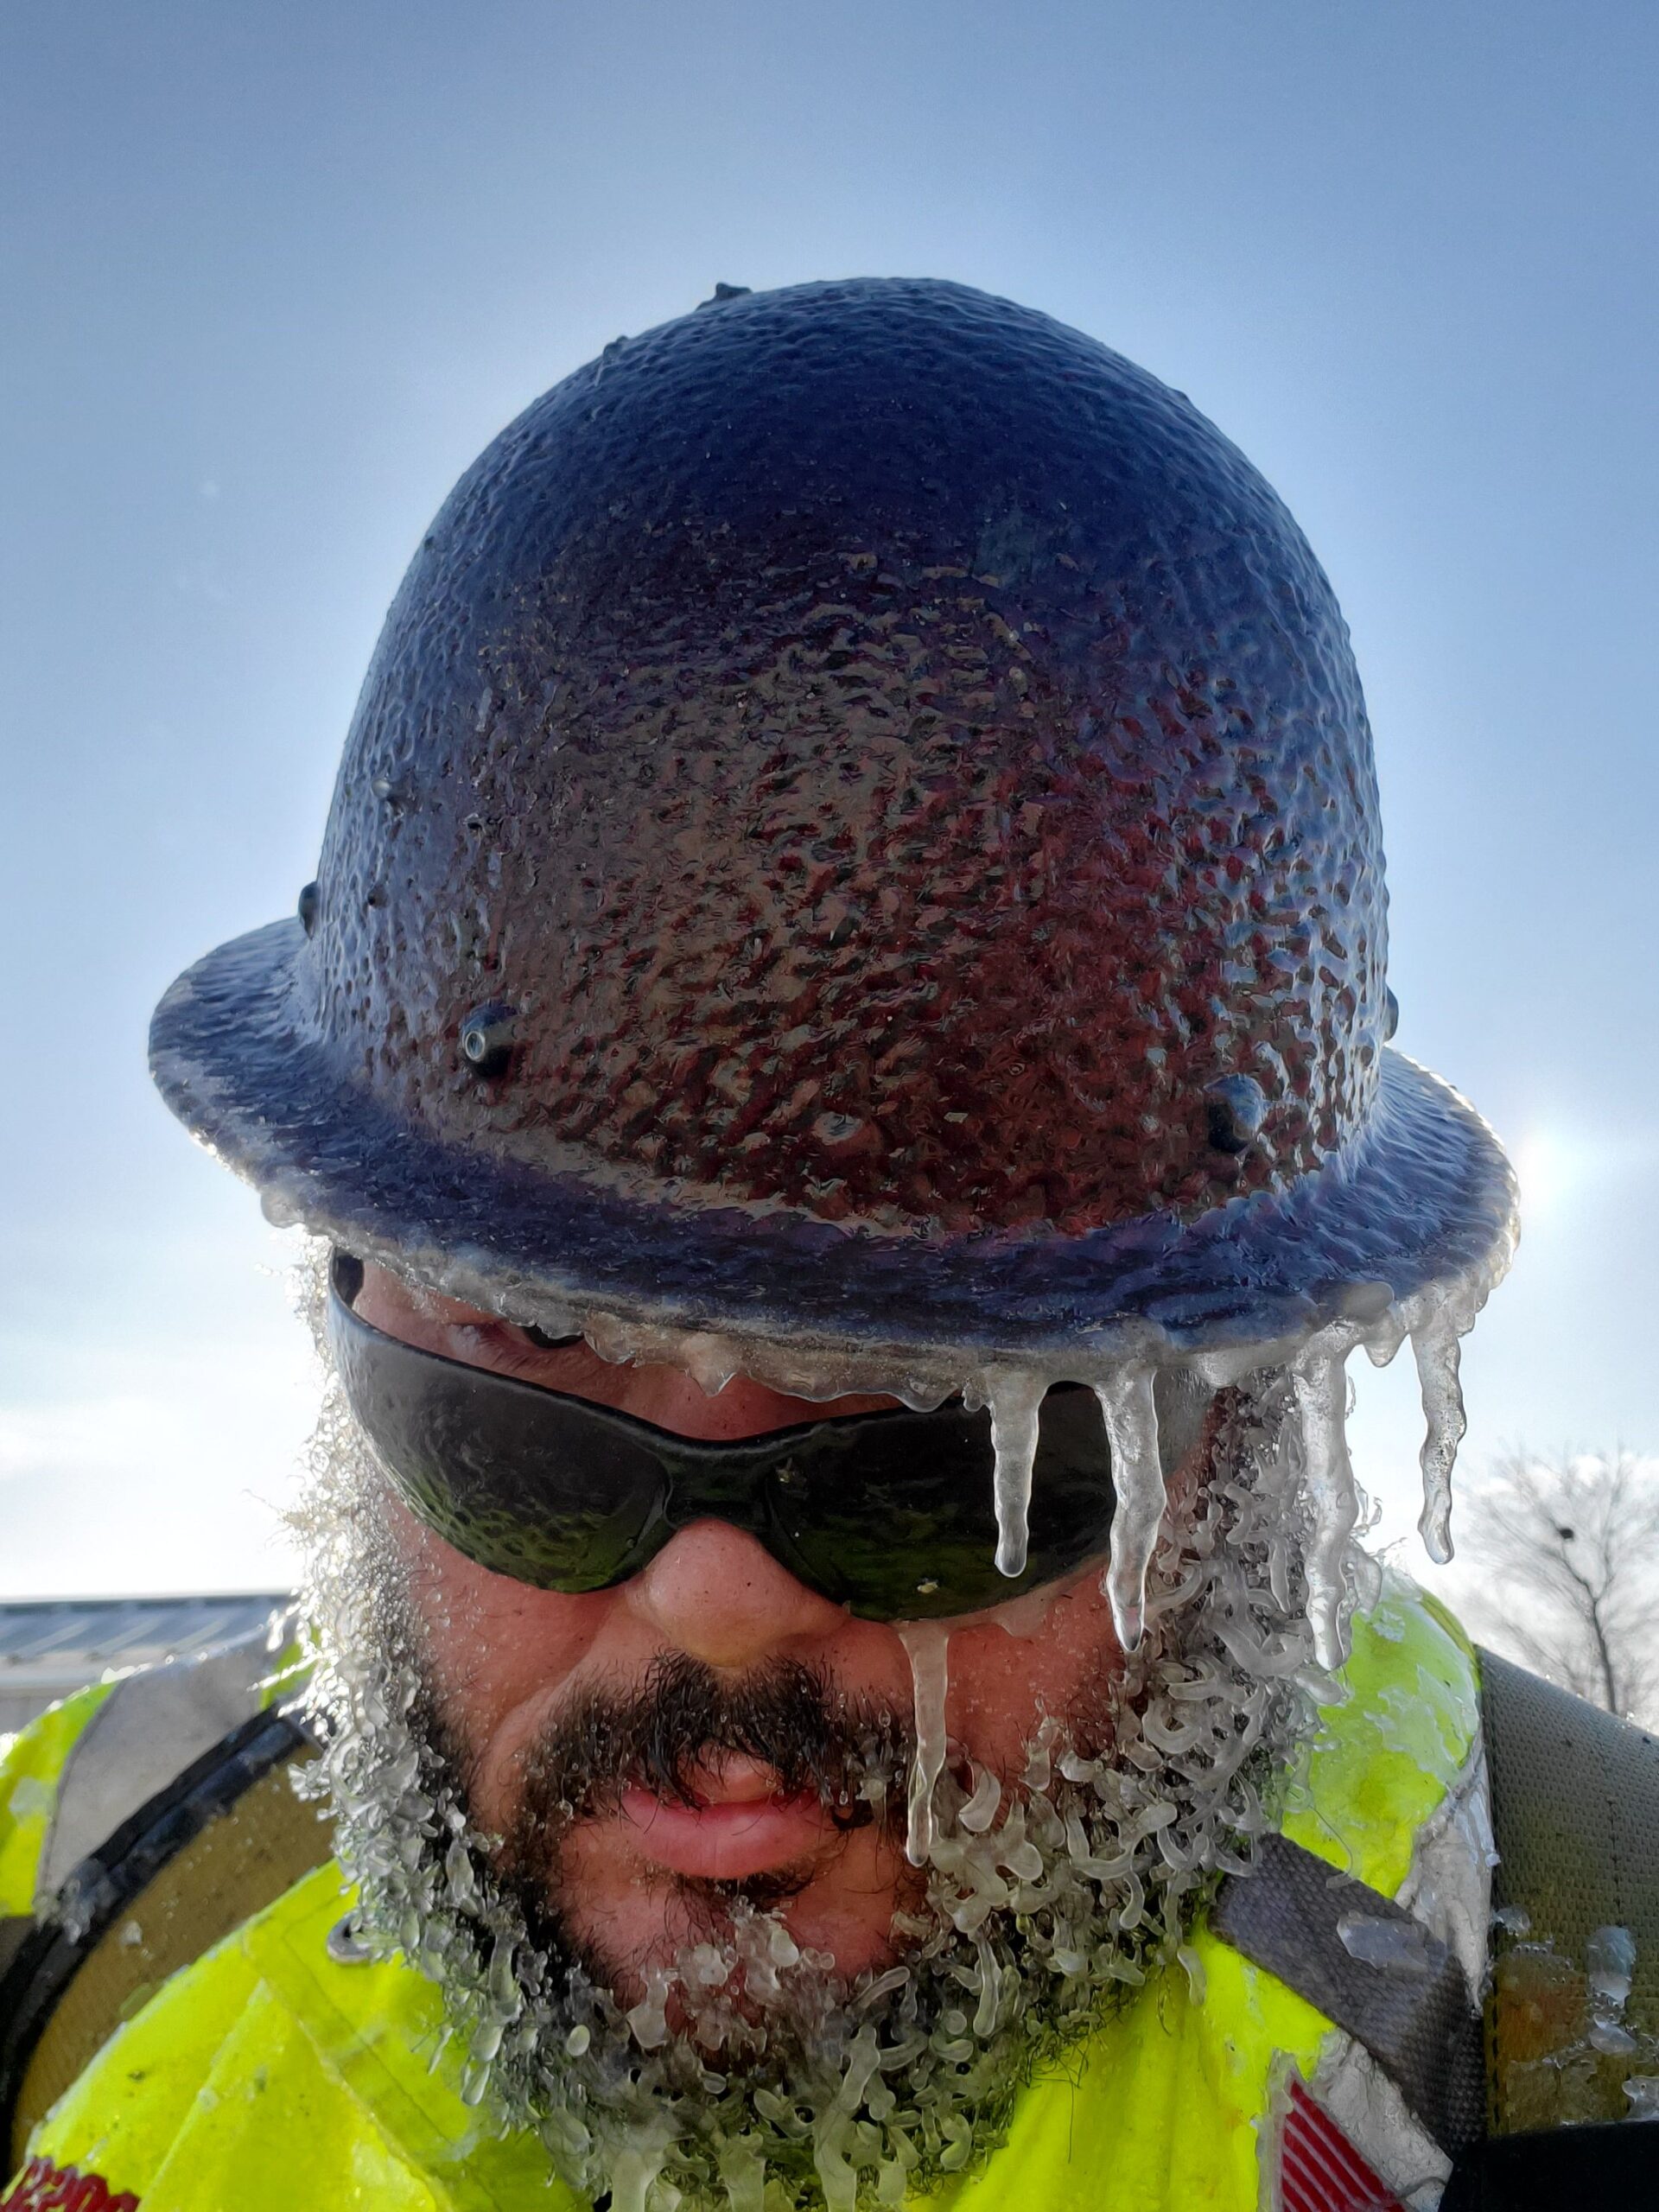 A construction working wearing a hat covered in ice.